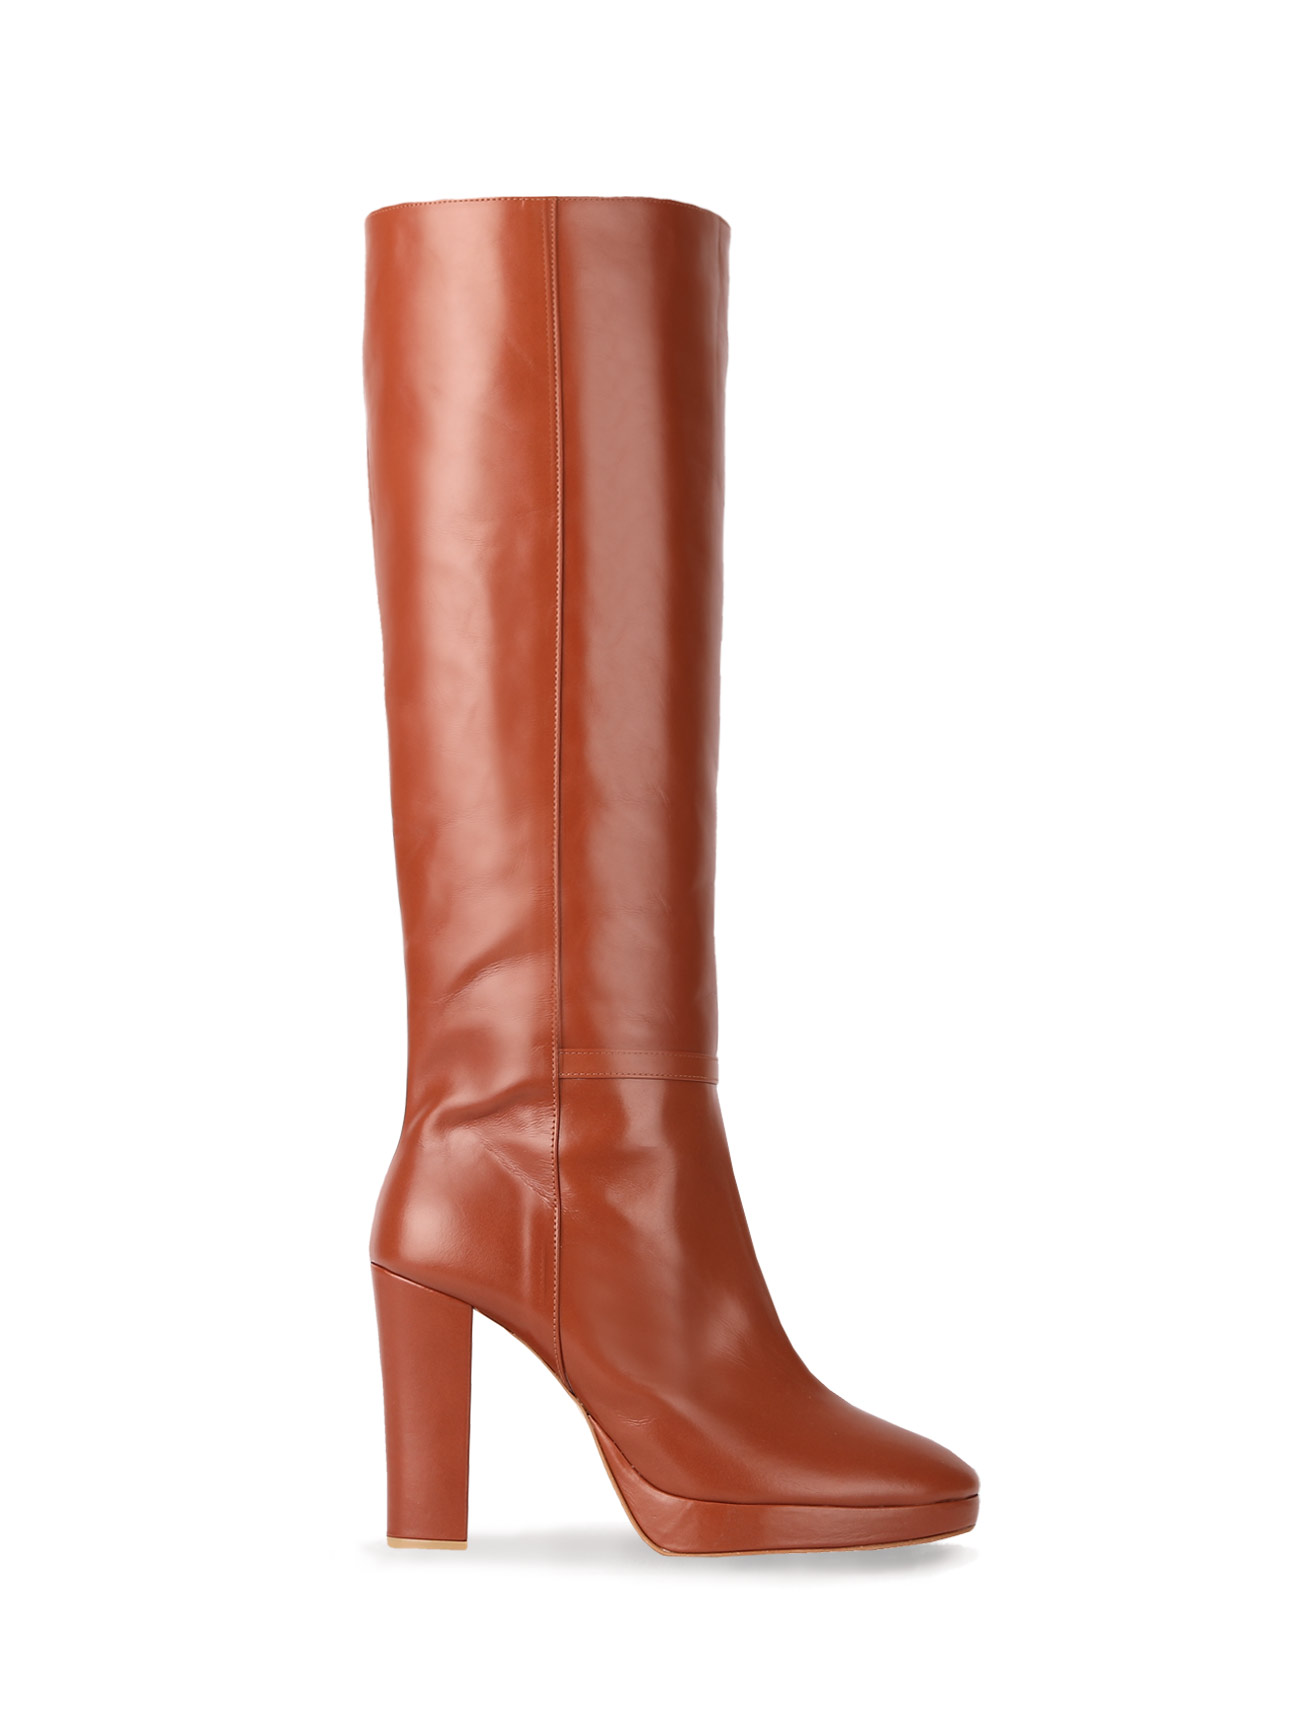 70&#039; KATE LEATHER KNEE BOOTS - AMBER BROWN